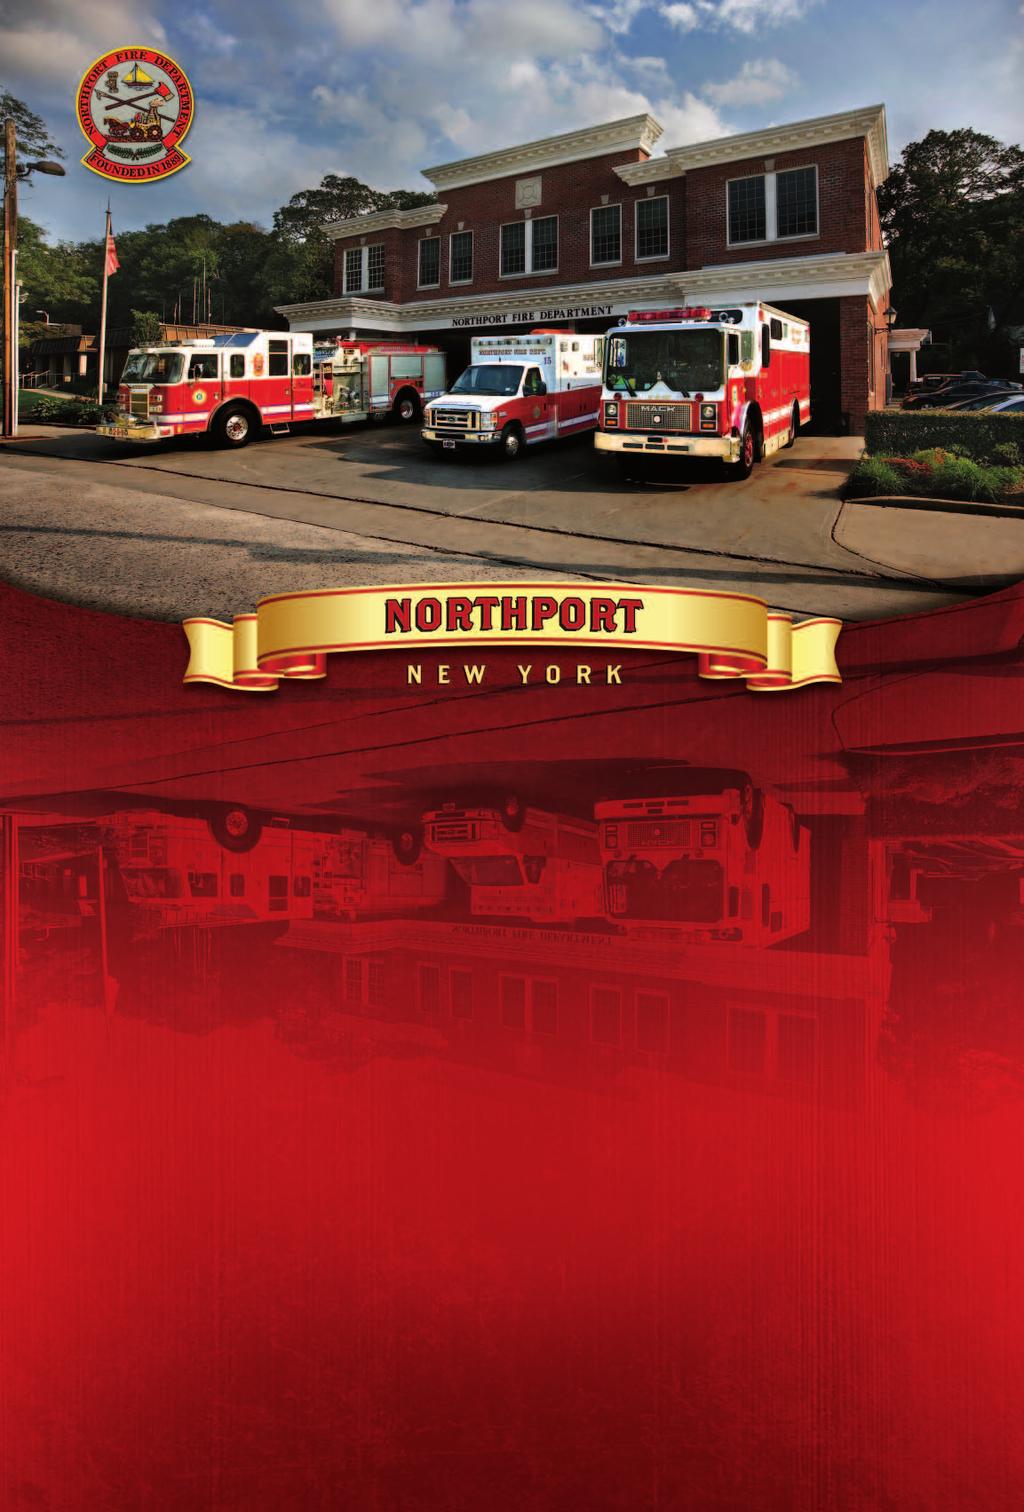 Northport Volunteer Fire Department Proudly Serving the Northport Community Since 1889 JUNE MAY 1 2 3 4 5 6 7 8 9 10